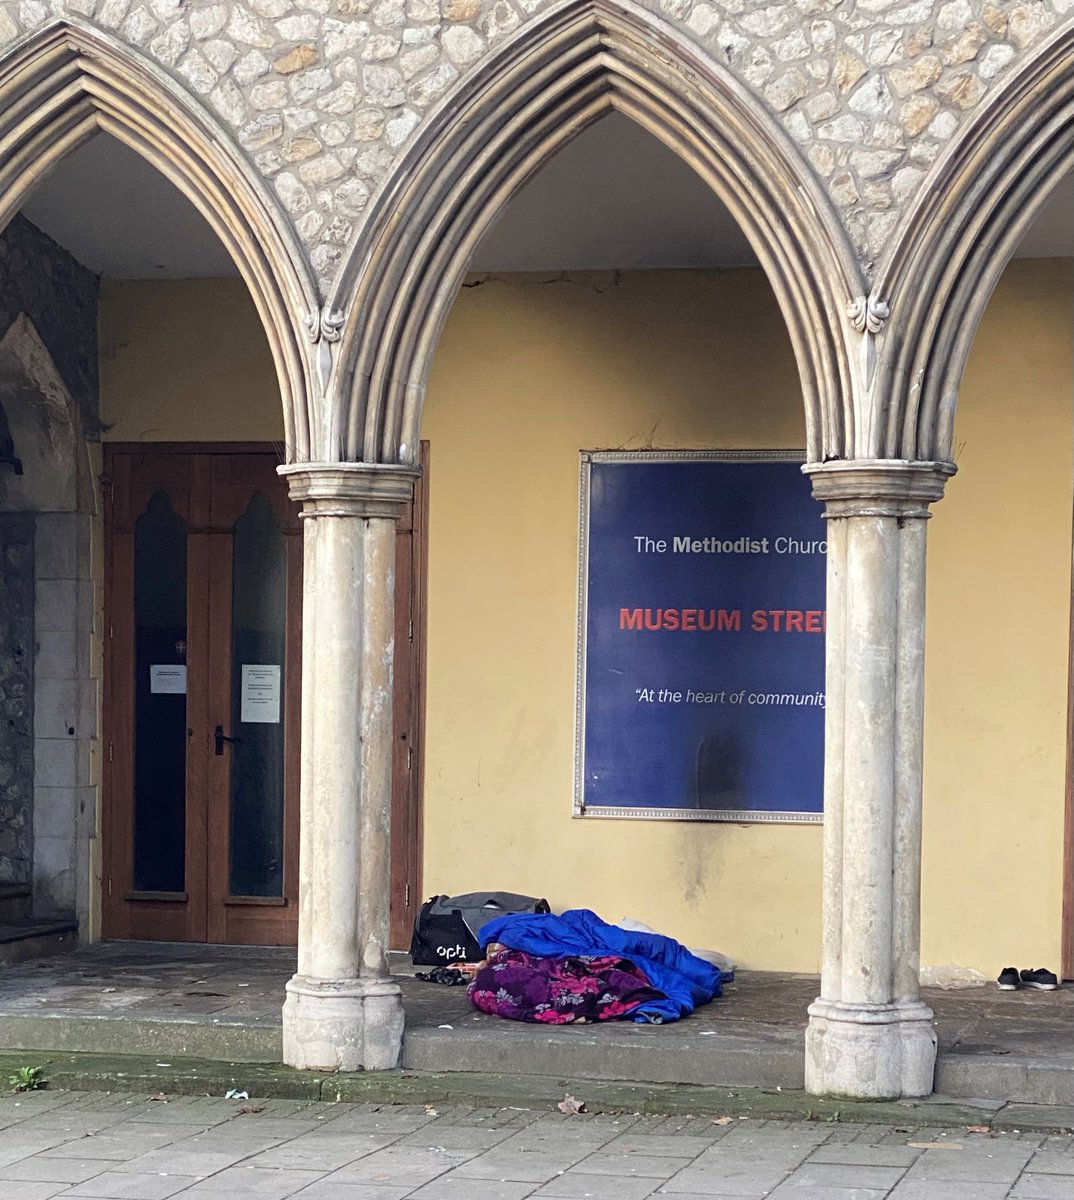 With the activation of the Severe Weather Protocol #SWEP @IpswichGov has managed to support three #roughsleepers into emergency beds. Our Outreach staff are out every morning to check on anyone else who continues to #sleeprough